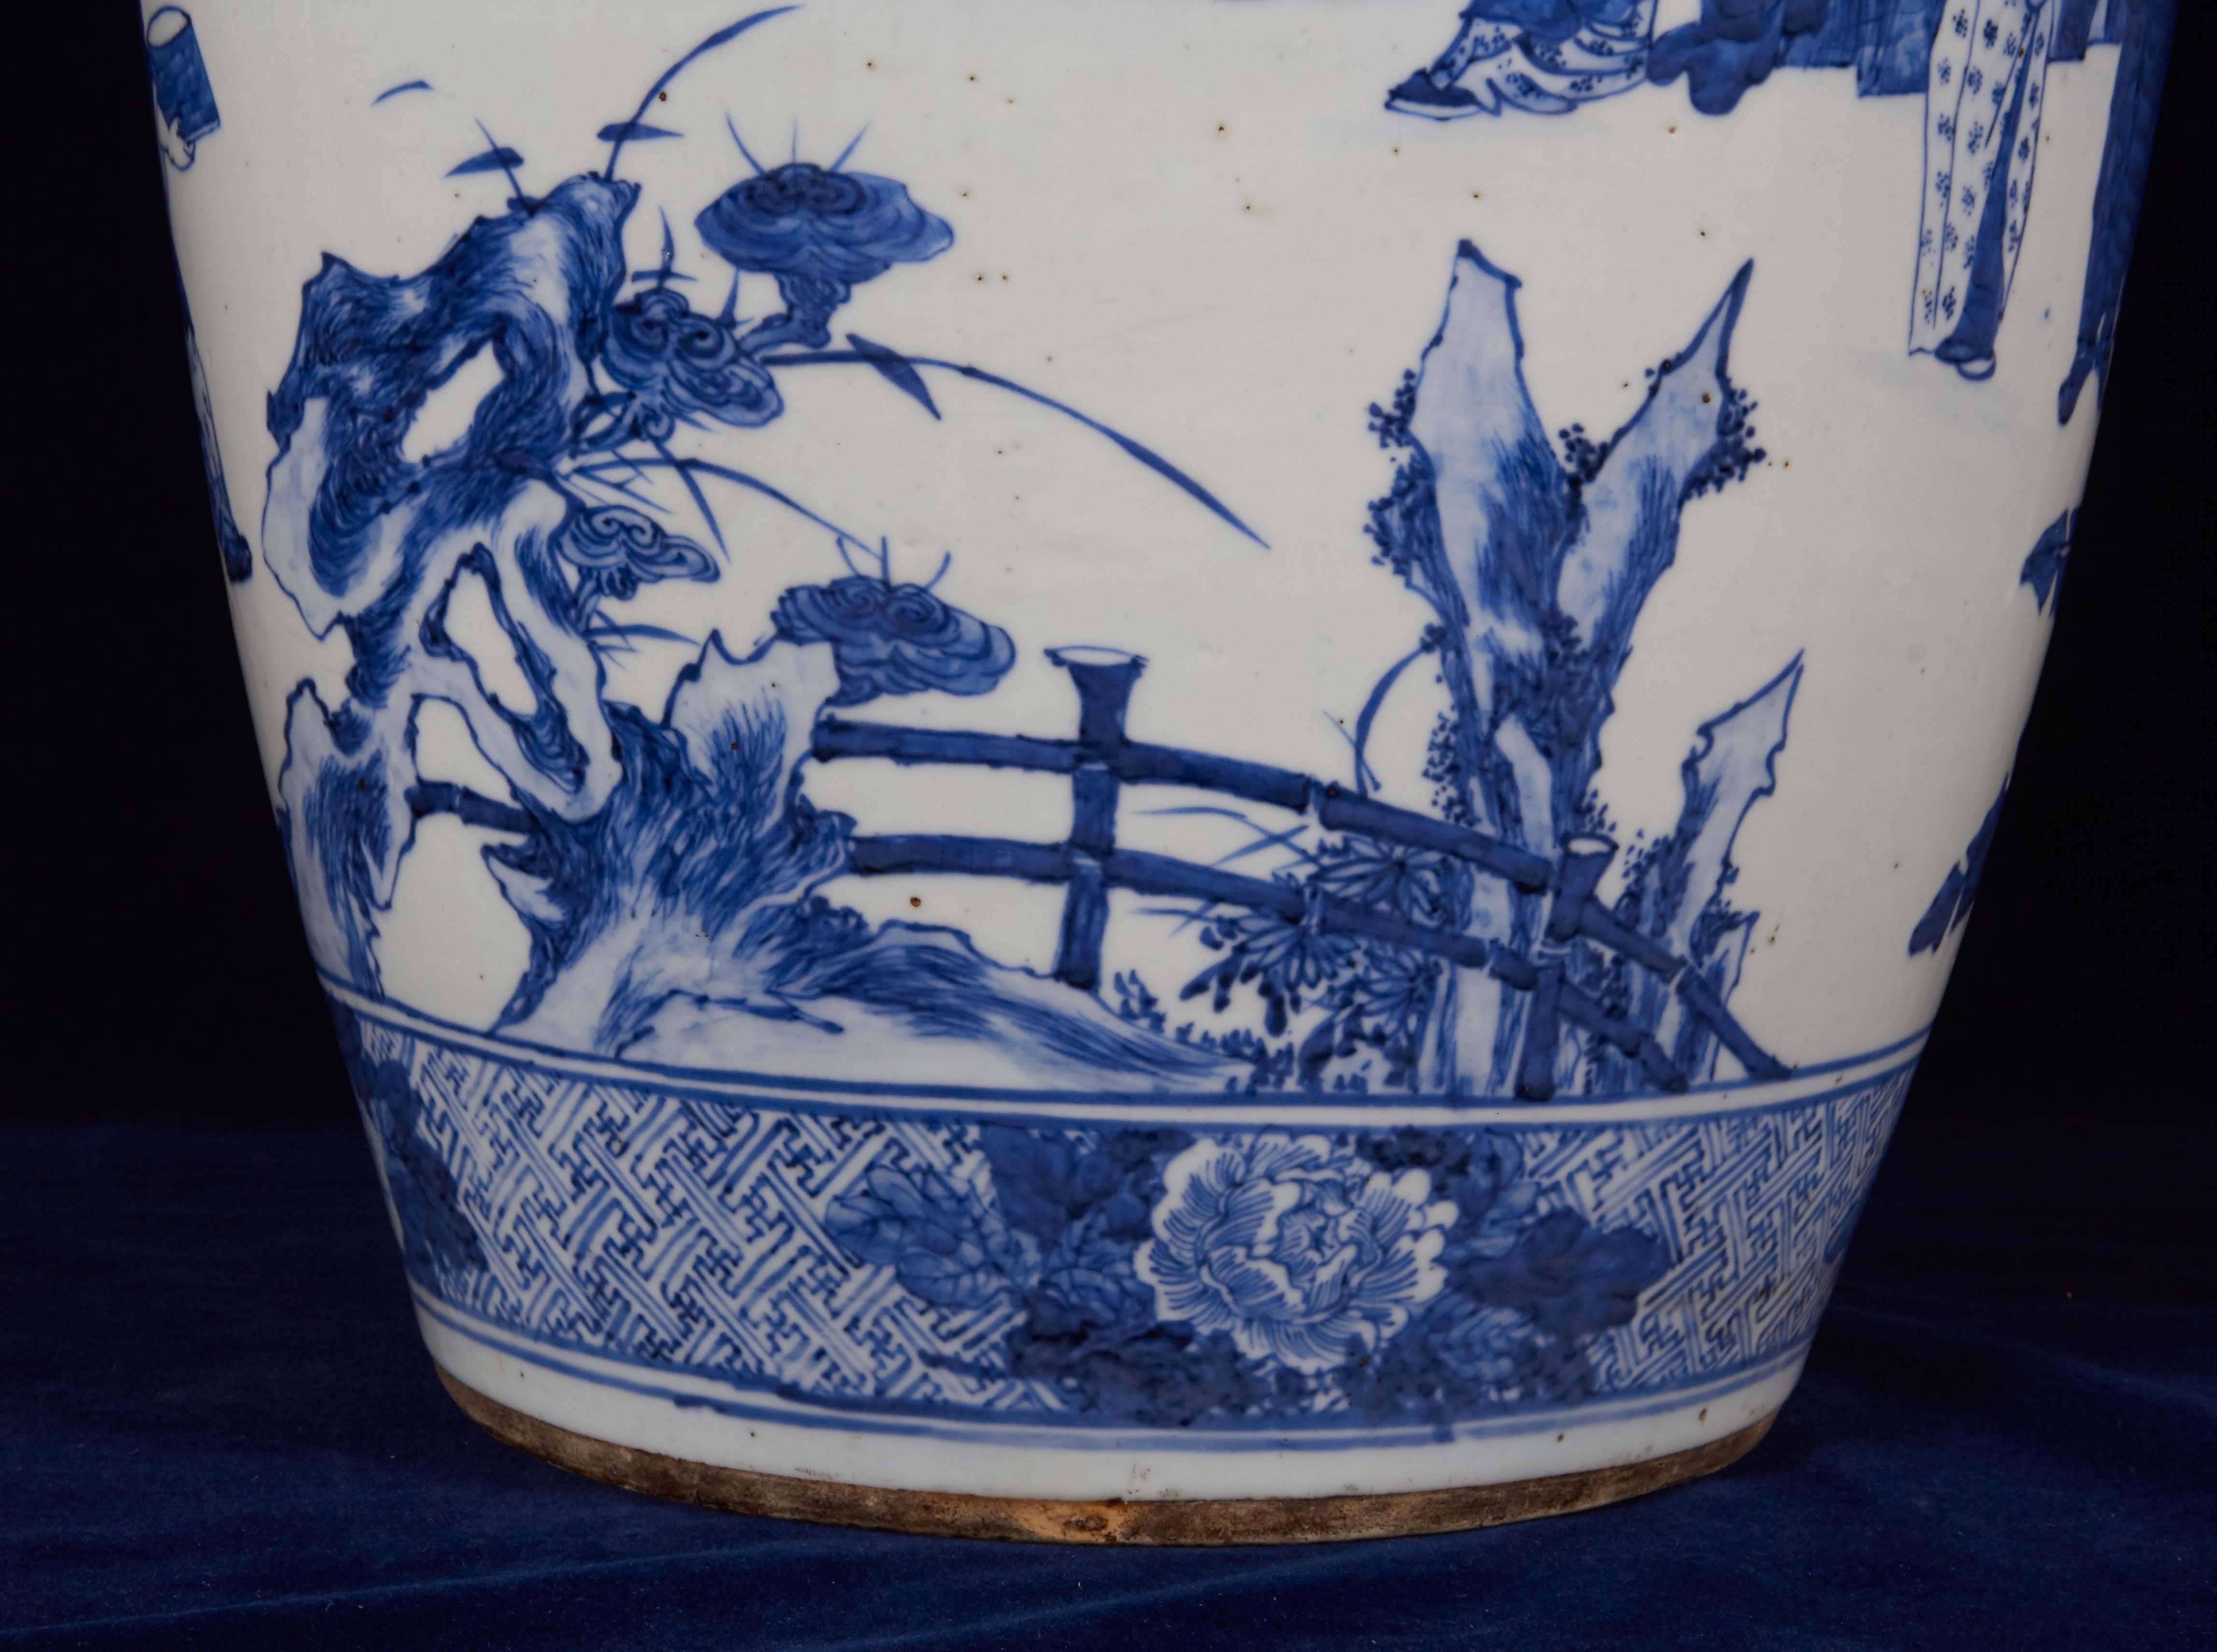 A large Chinese porcelain figural blue and white vase.
19th century, signed on the underside with characters in black ink.
Ovoid with flared mouth, finely painted with a continuous scene of court figures performing a tea ceremony and ladies